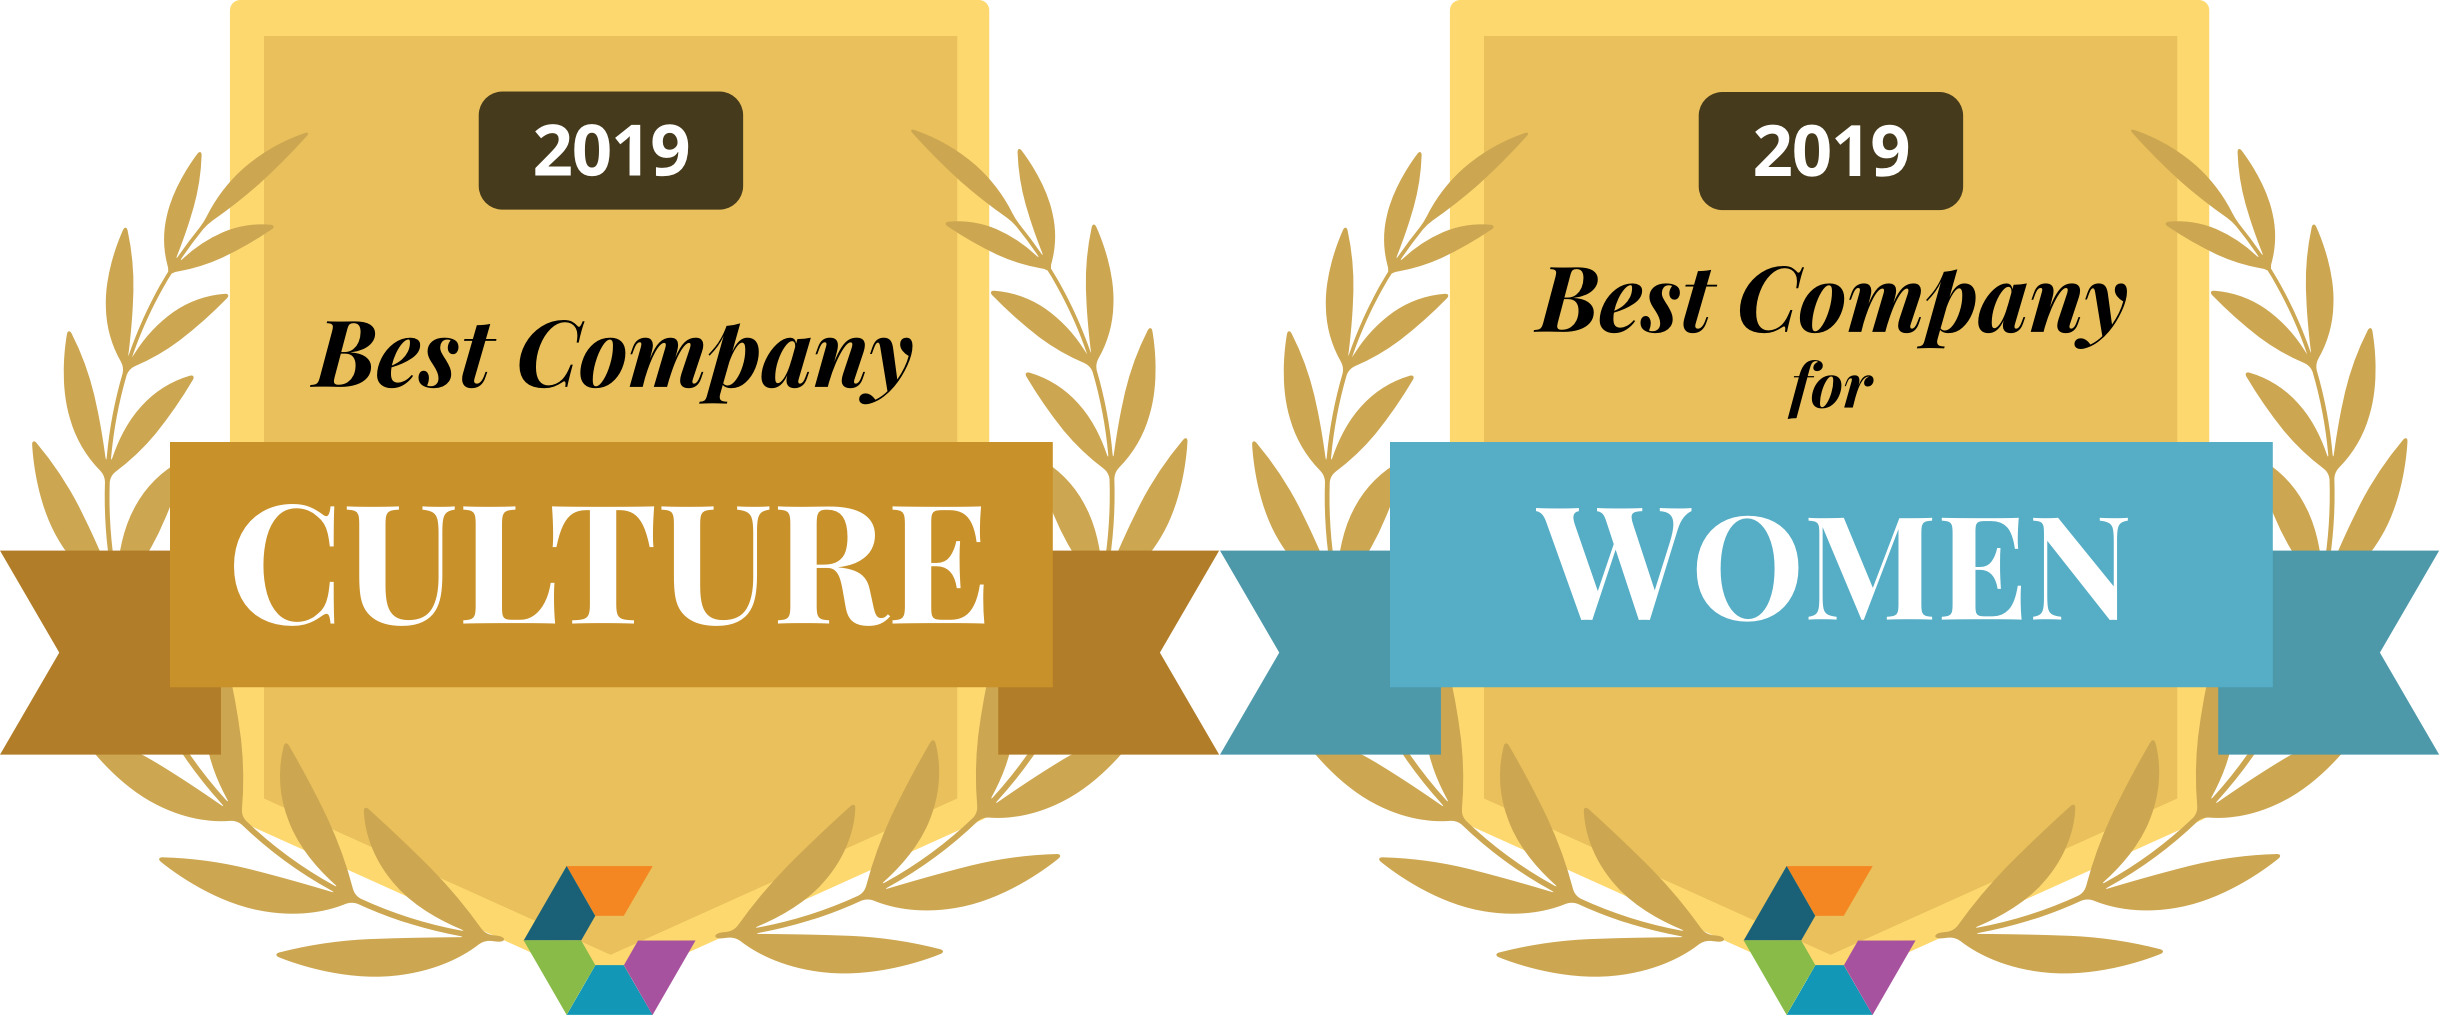 Comparably Badges for best culture and best for women